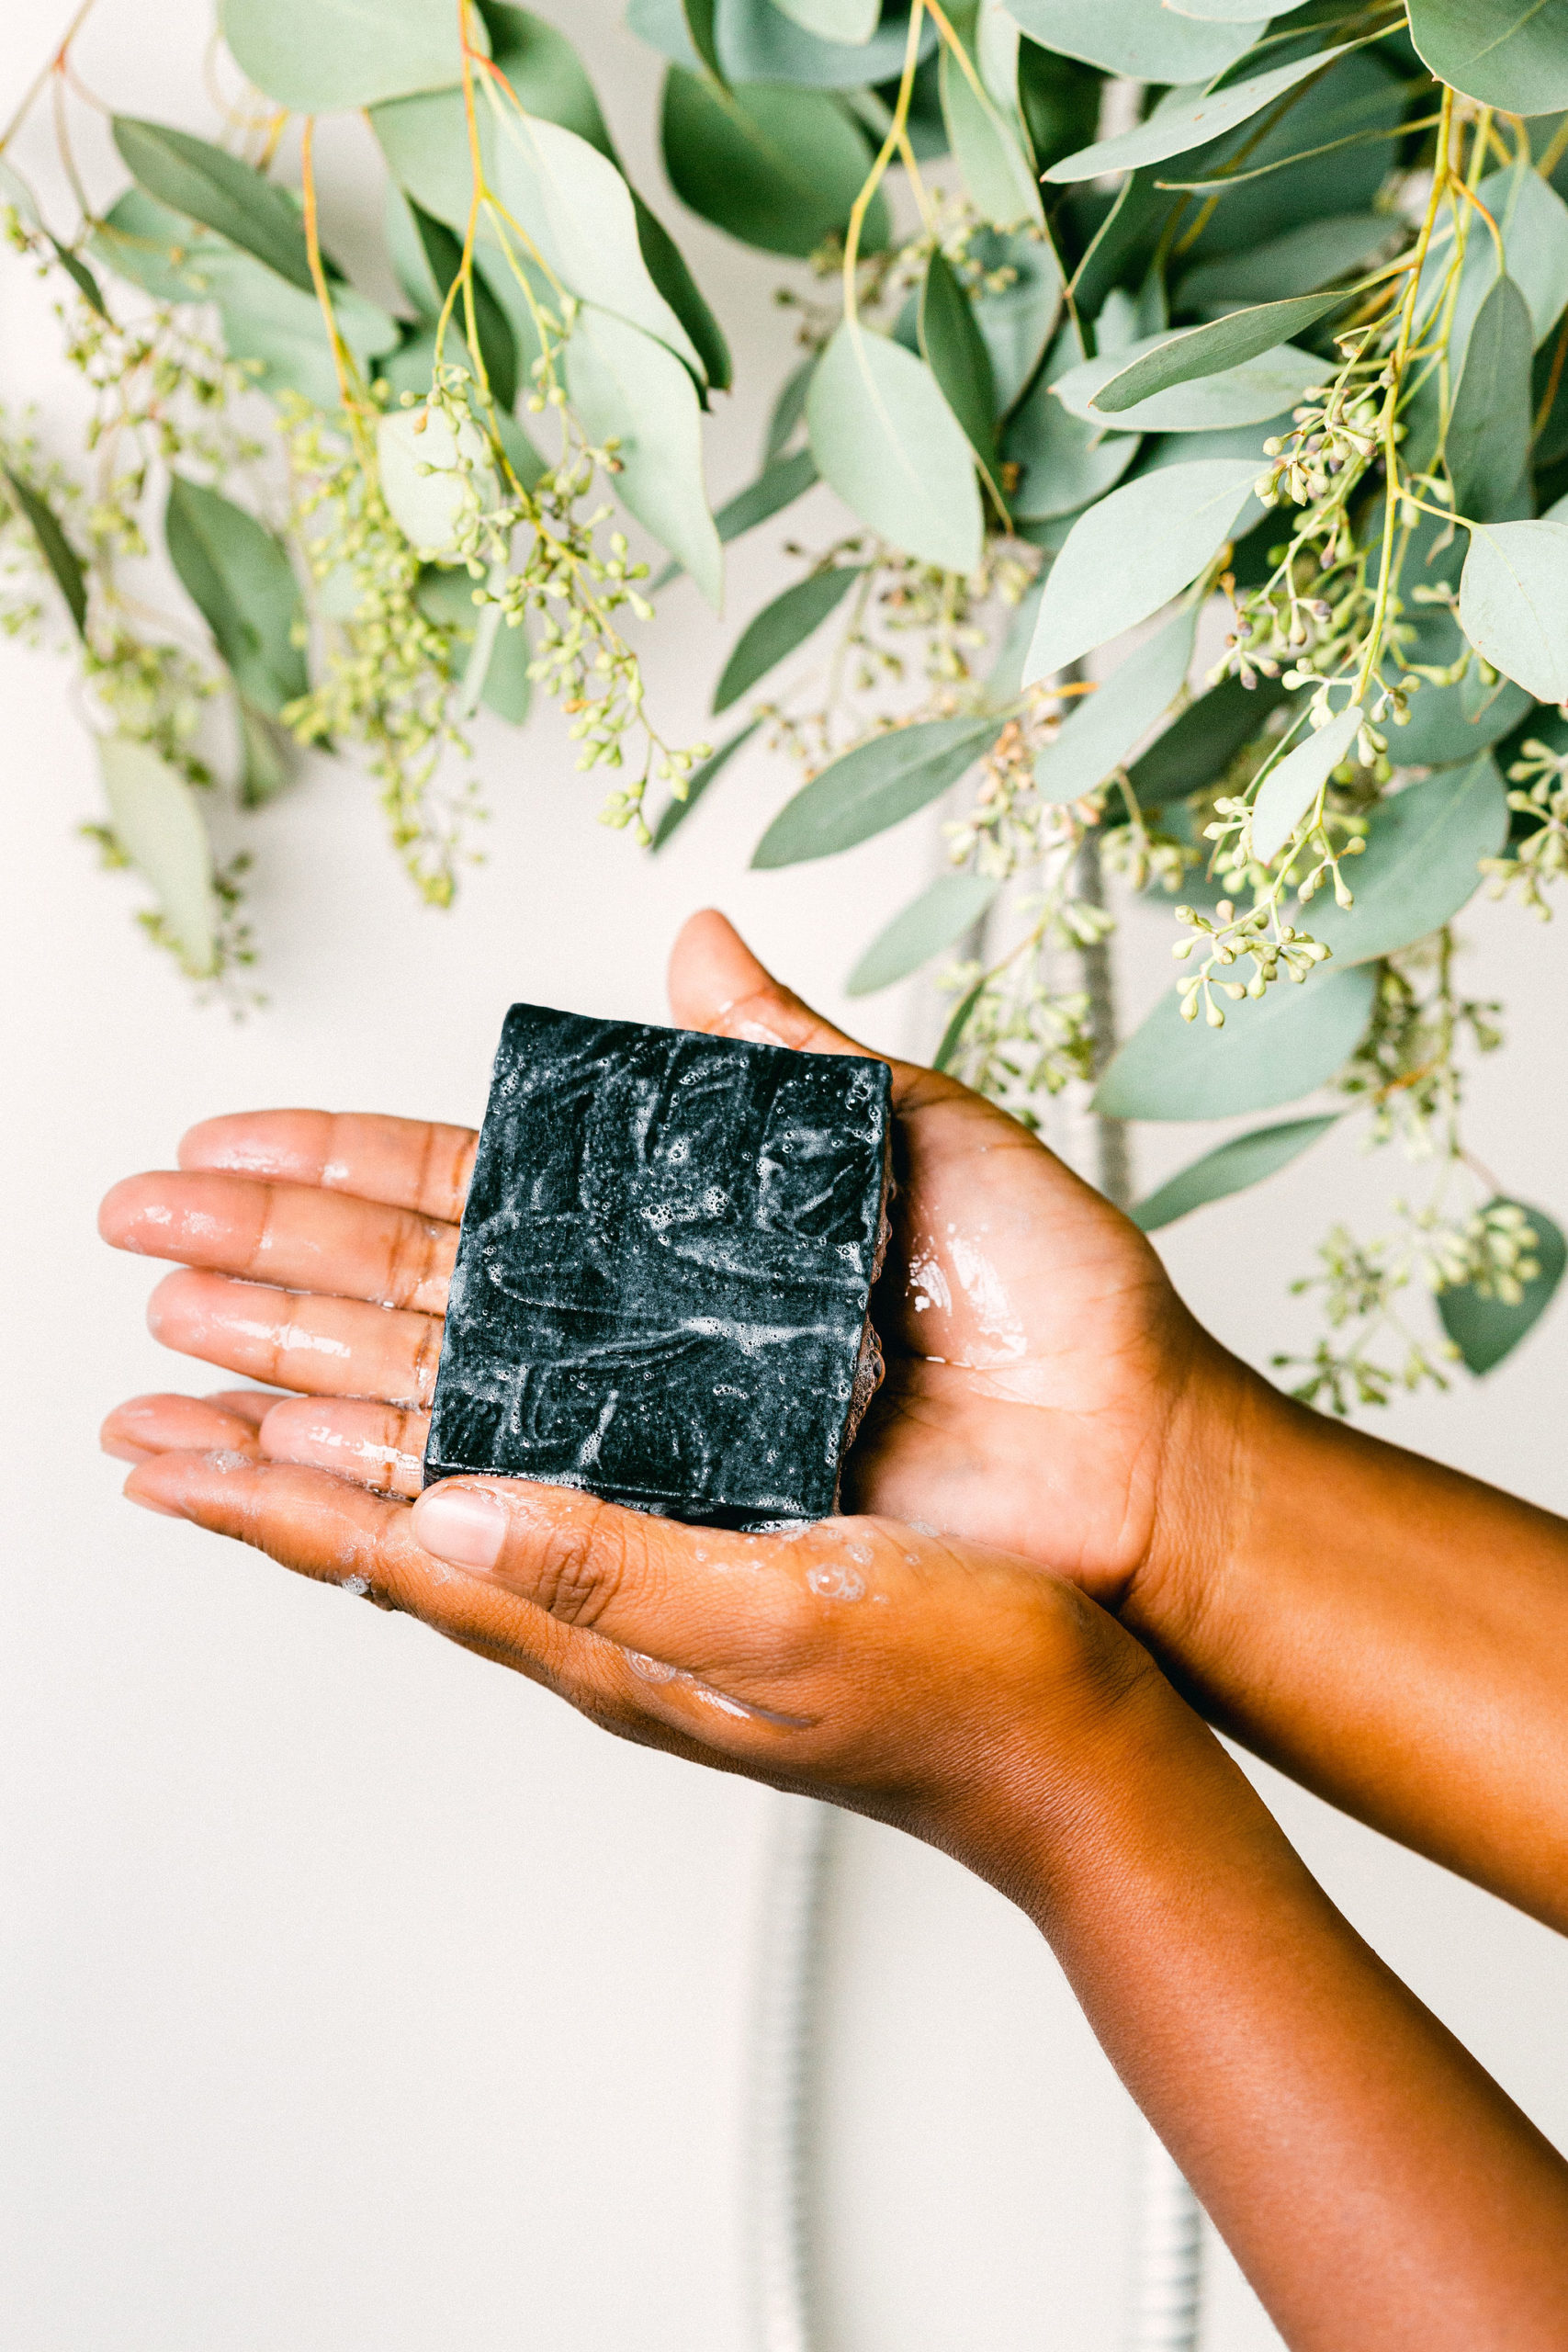 Charcoal soap styled product photography small business lathered soap in shower hands eucalyptus natural pretty vegan